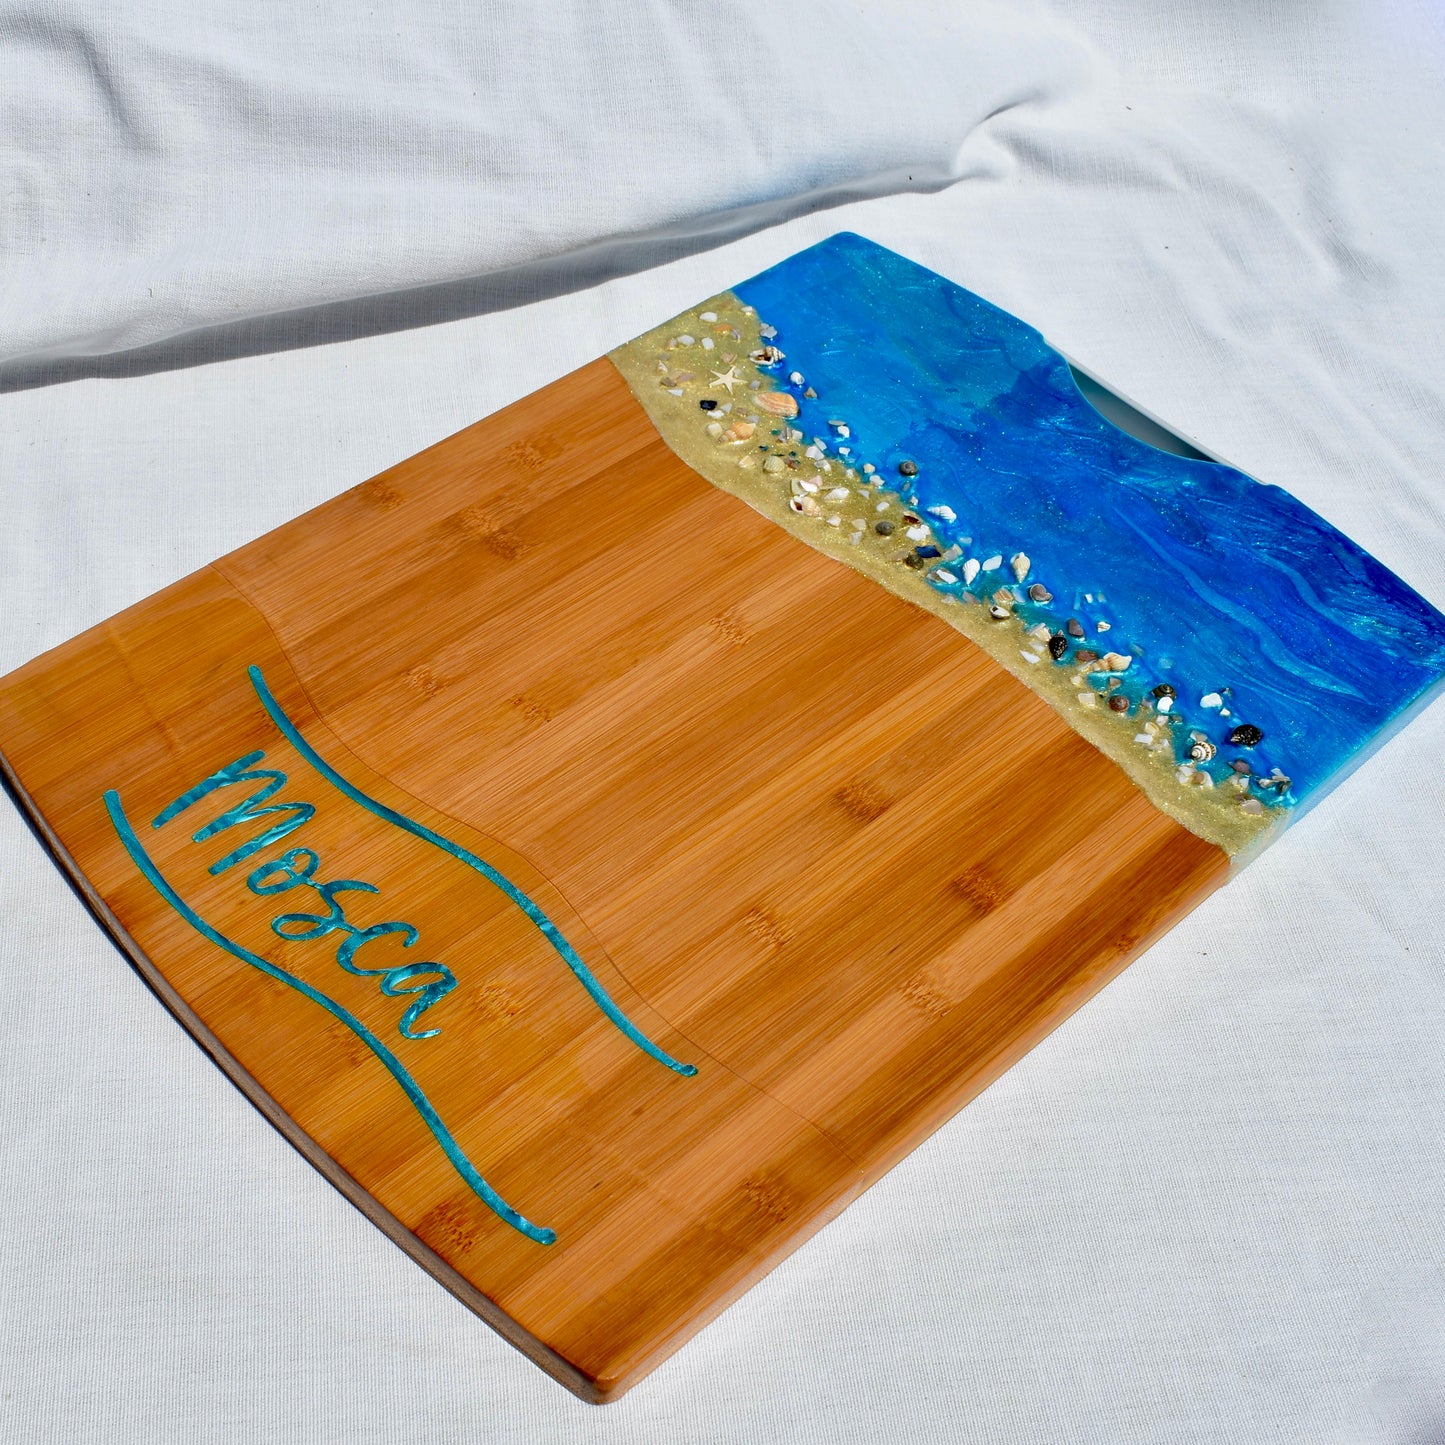 Beach themed charcuterie board features ocean shimmering ocean blue water, spiral and abalone shells, and is personalized with the buyers name between two to wavy teal colored lines.